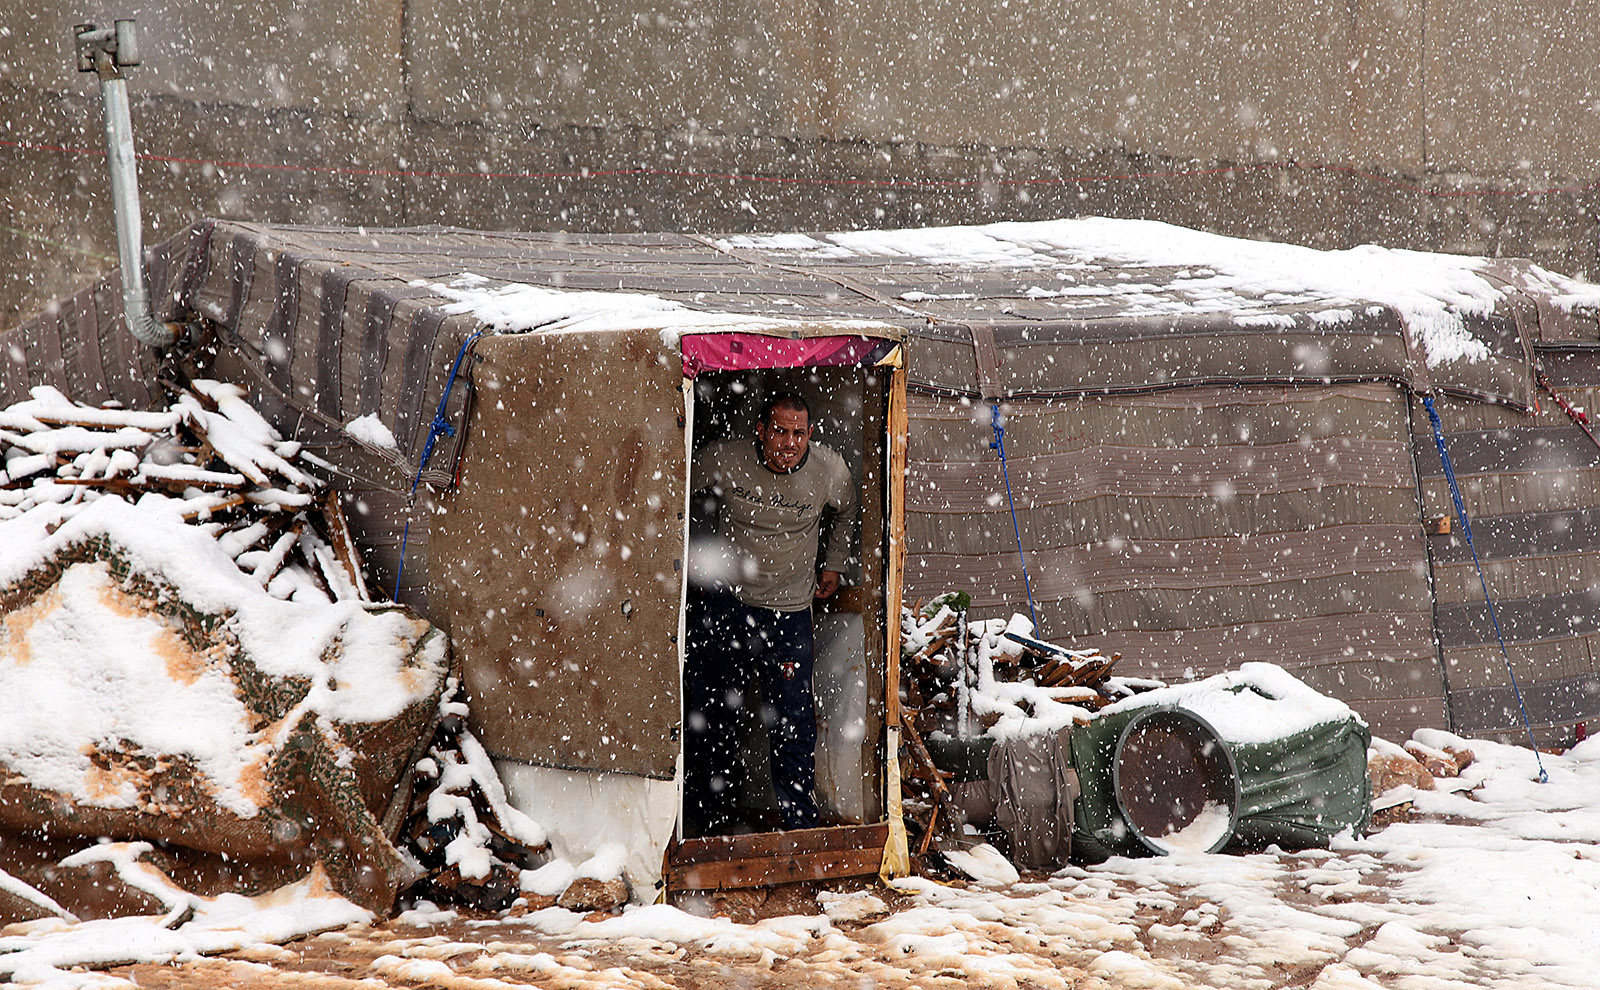 A Syrian refugee looking out of his makeshift tent dwelling in Amman, Jordan, December 12, 2013